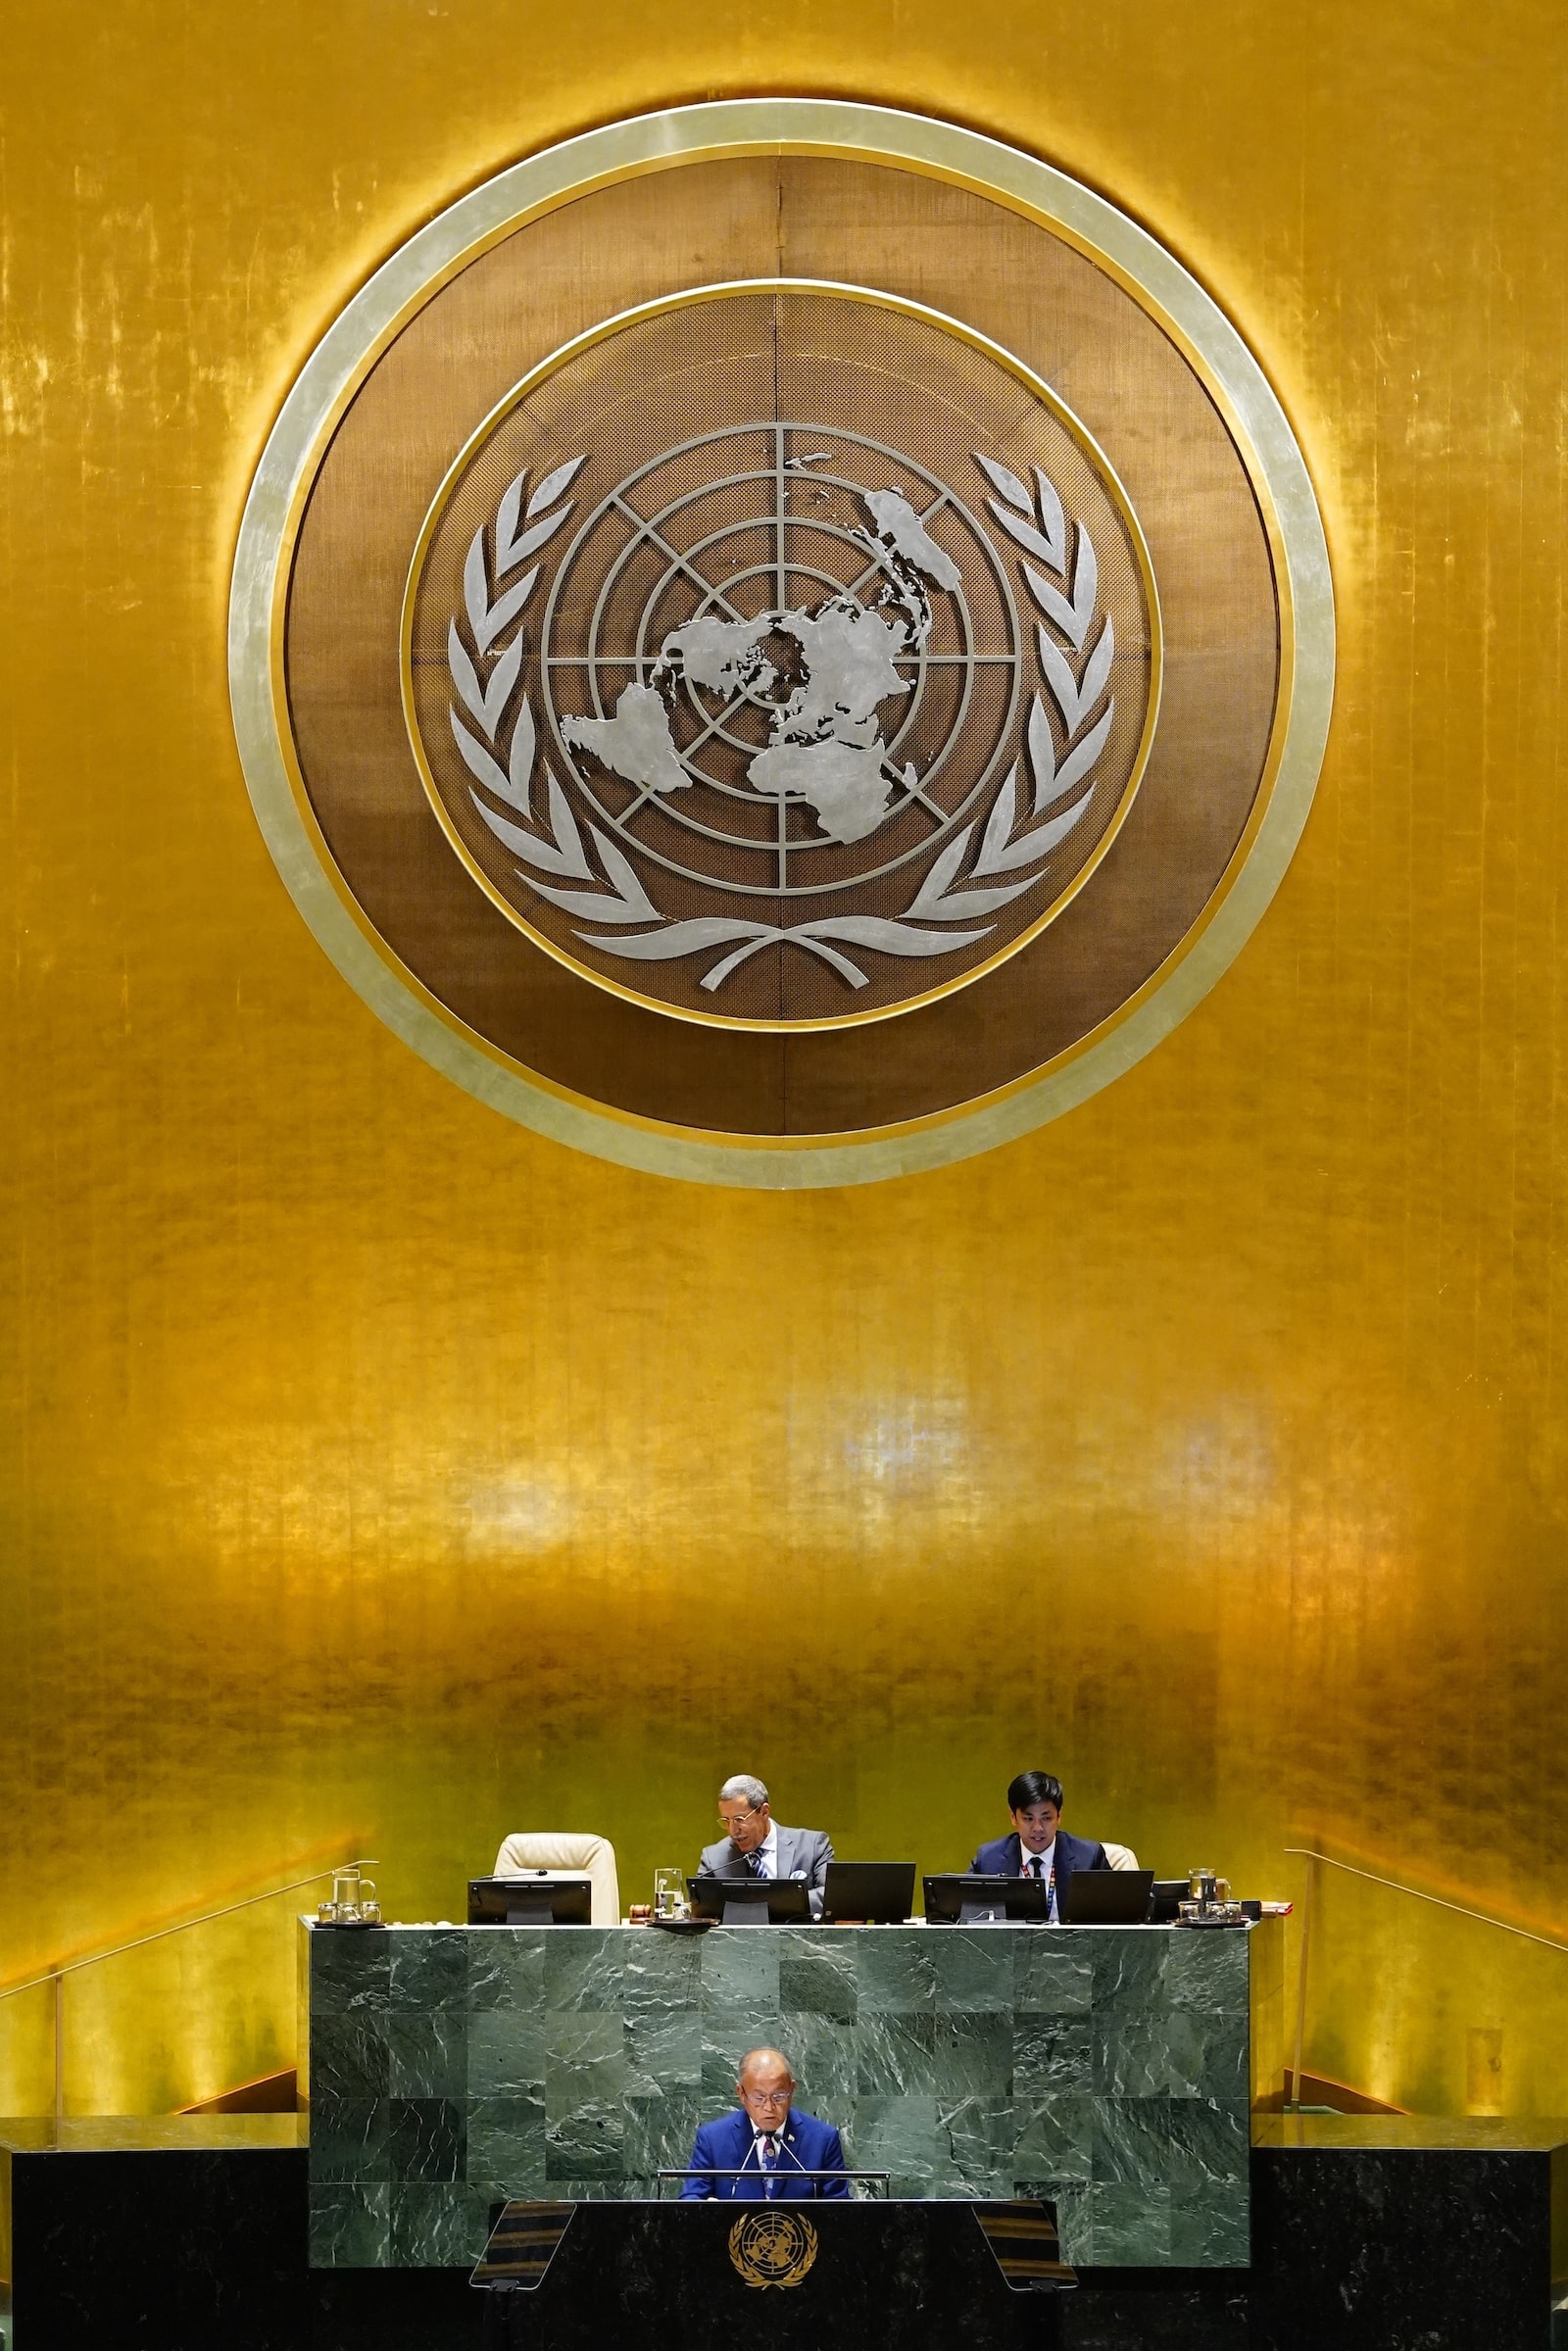 A large UN seal in a gold room under which a man in a suit speaks at a podium